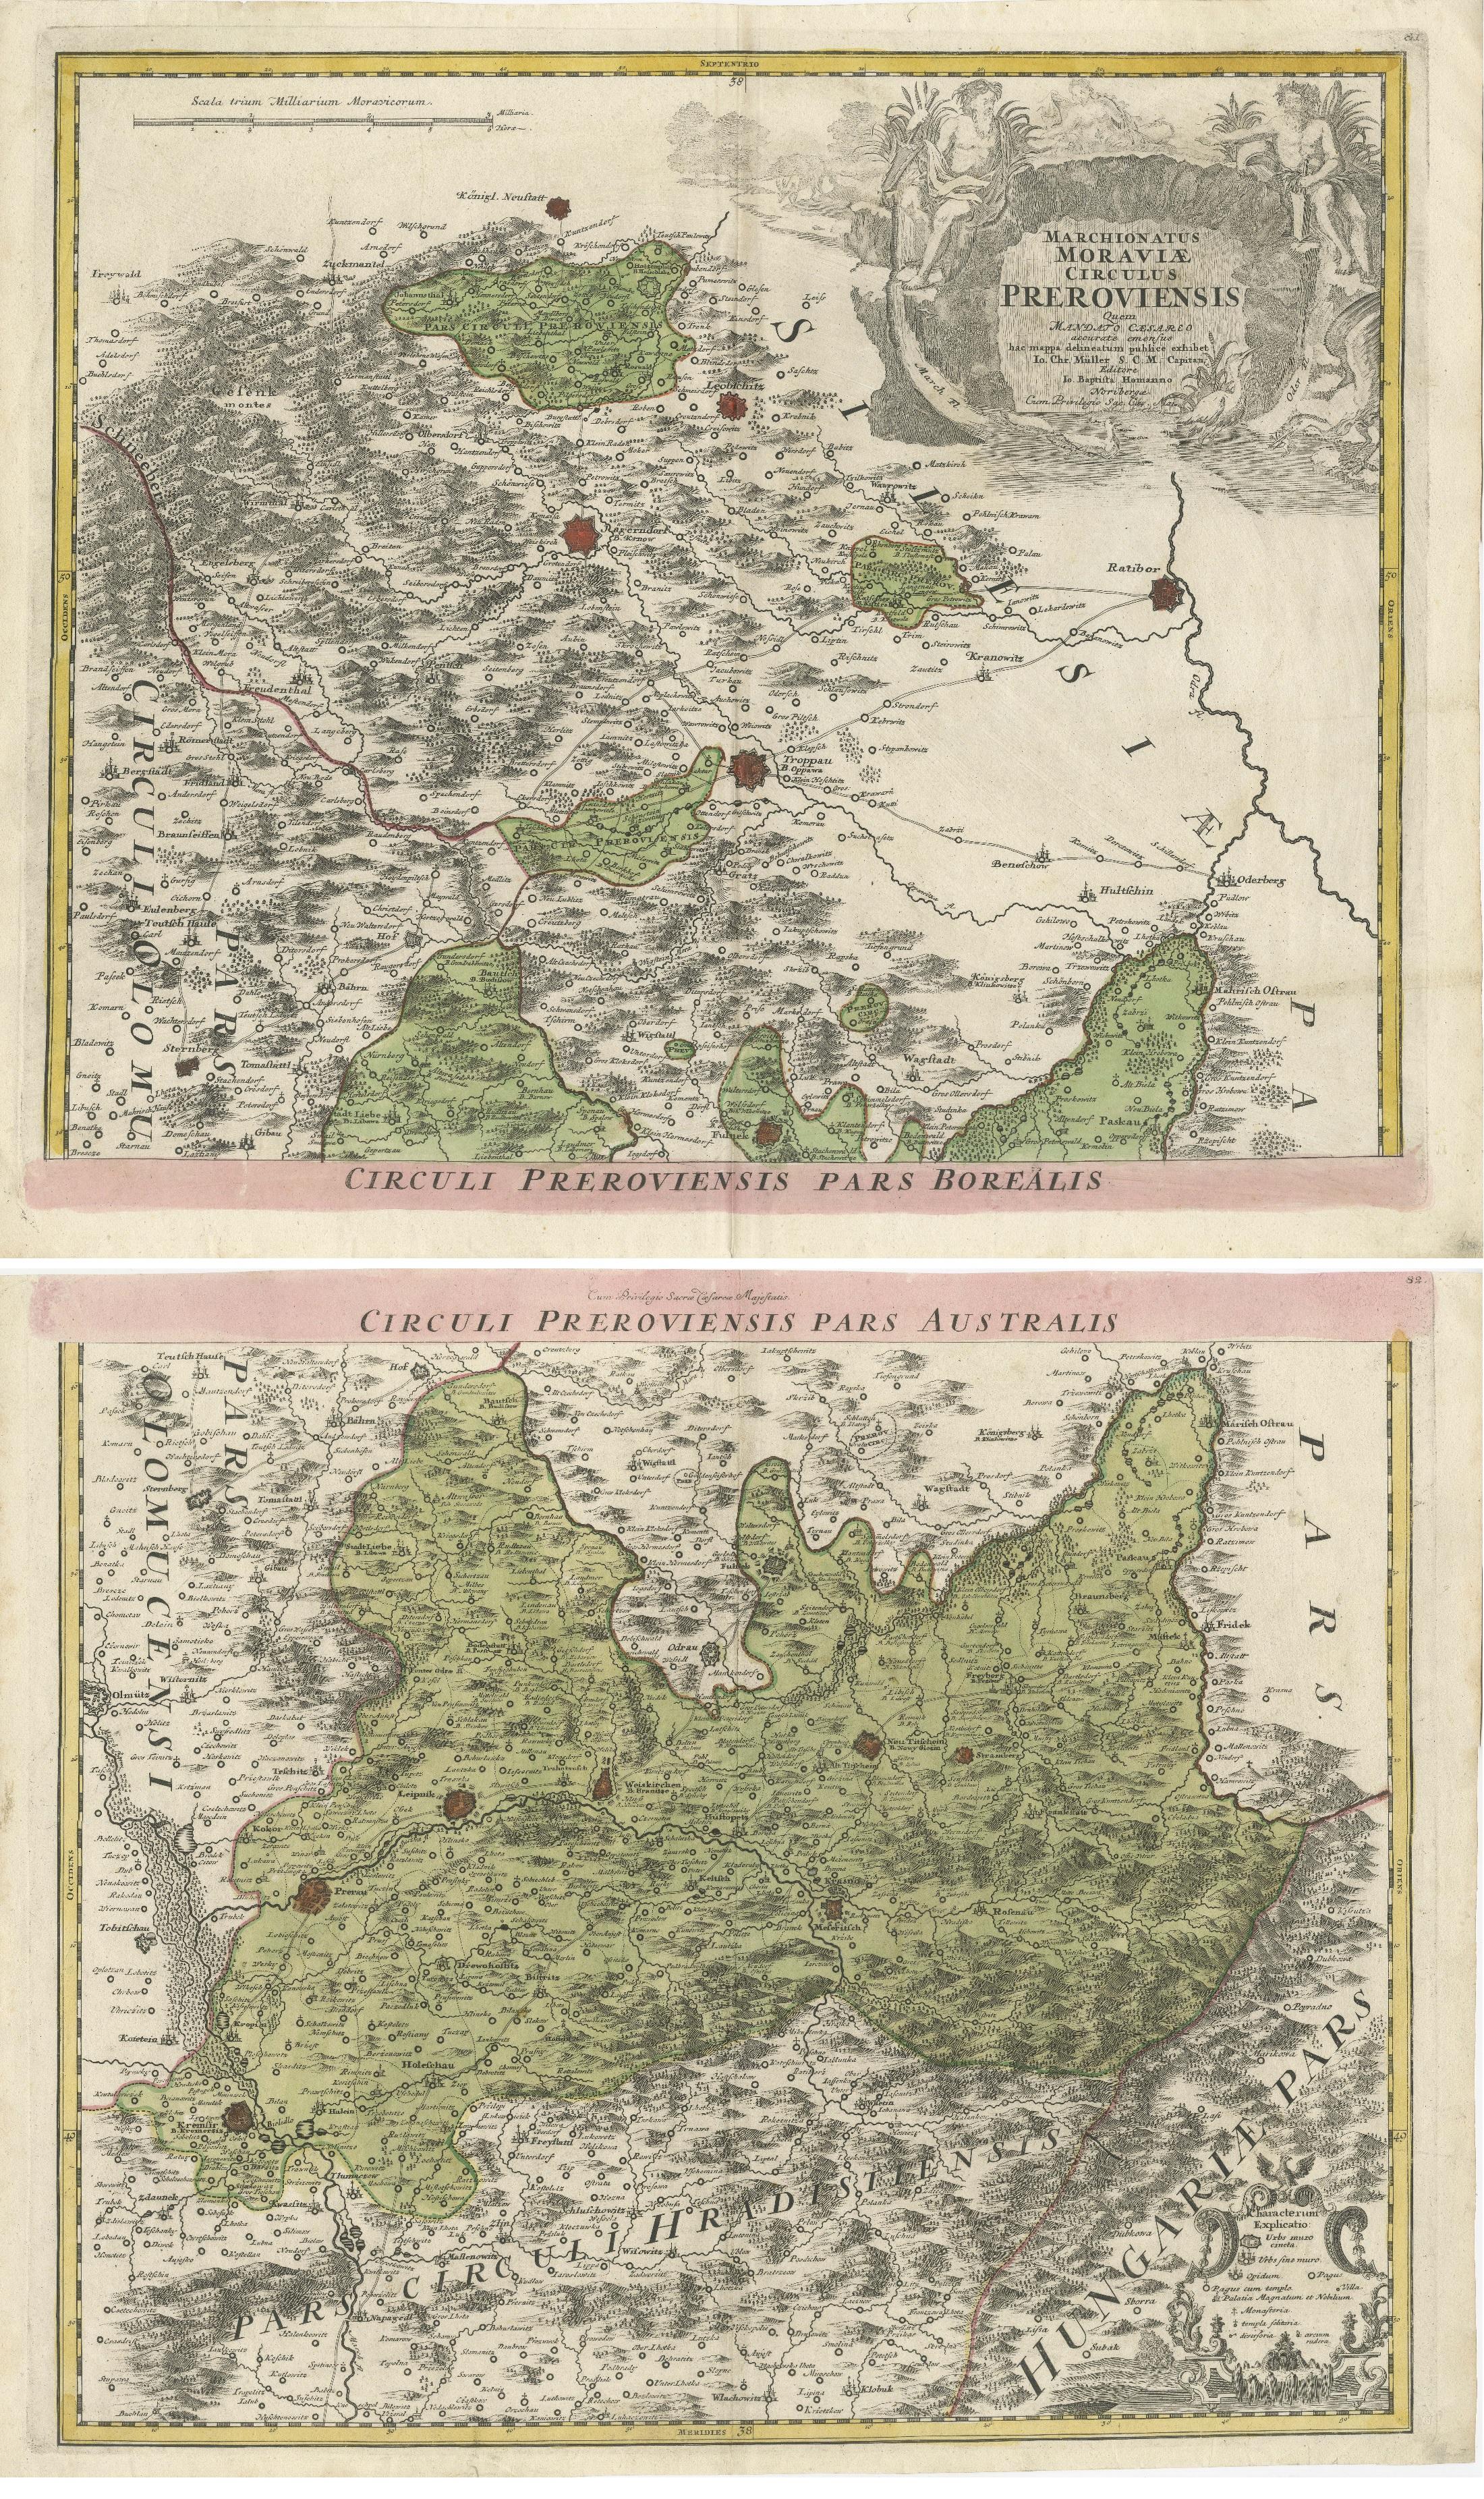 Set of two antique maps titled 'Marchionatus Moraviae circulus Preroviensis'. Two individual sheets covering part of modern-day Czech Republic. Cities included are Opava, Fulnek, Lipnik (Leipnik), Přerov (Prerau) and many more. Published by Johann